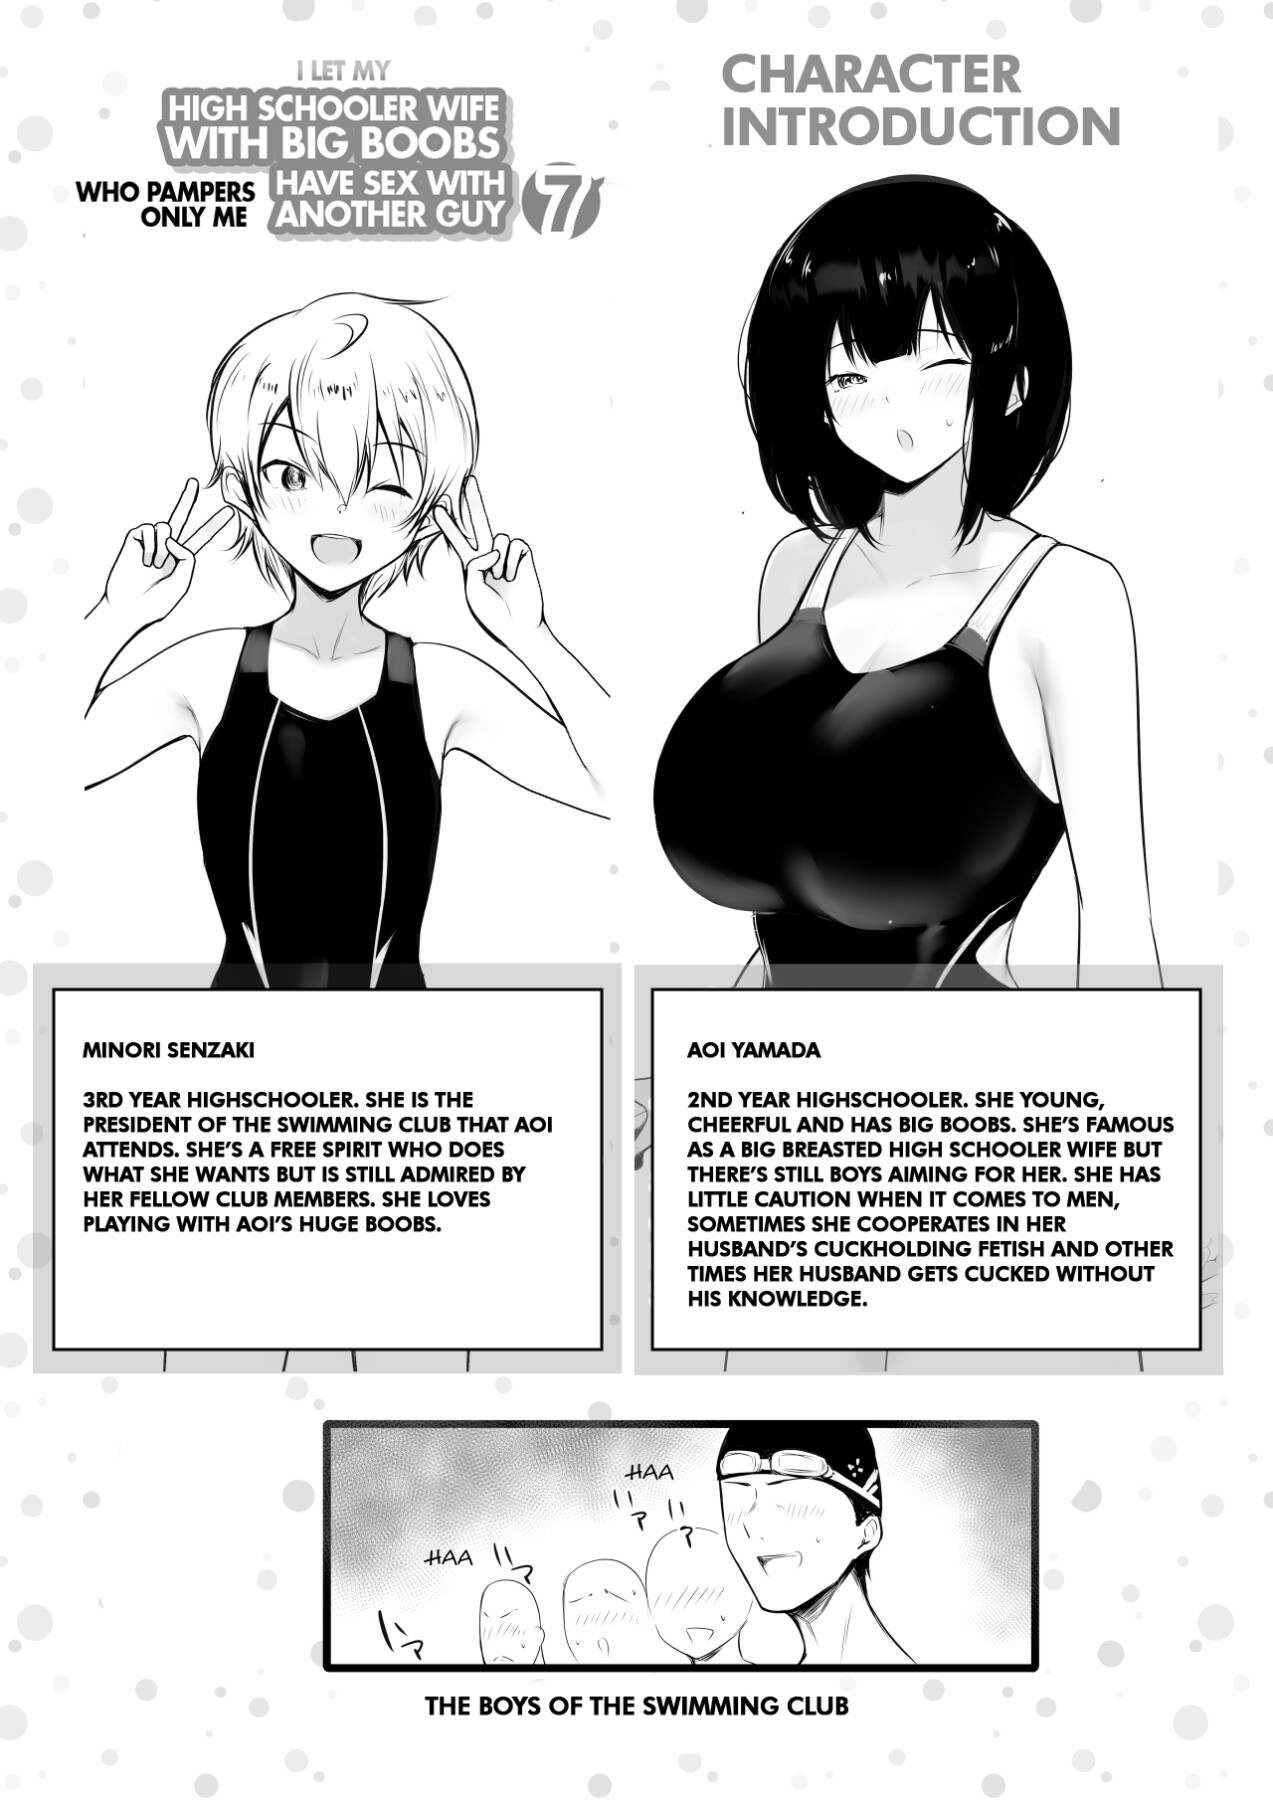 Hentai Manga Comic-I Witnessed The Big Breasted Schoolgirl Who Was Only Nice To Me having Sex With Another Man 7-Read-2